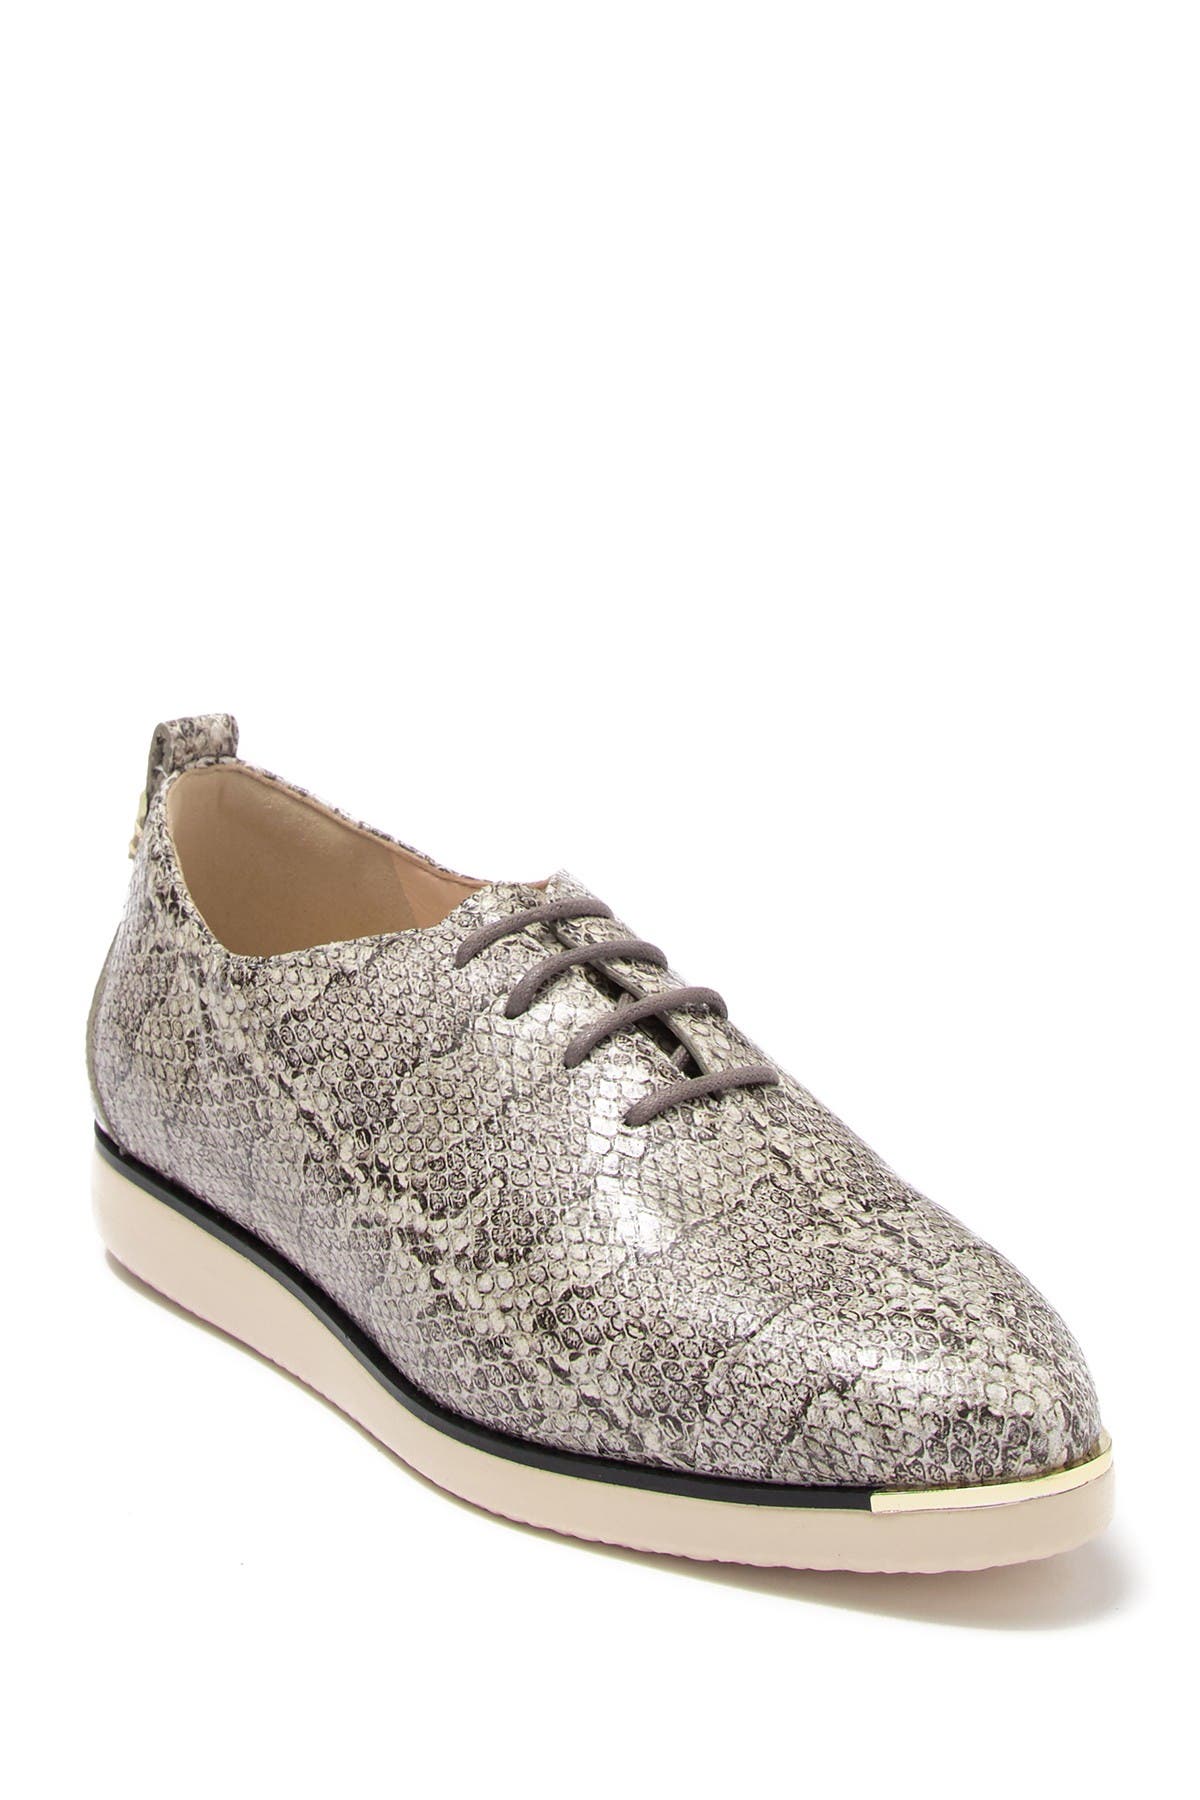 cole haan snake print shoes